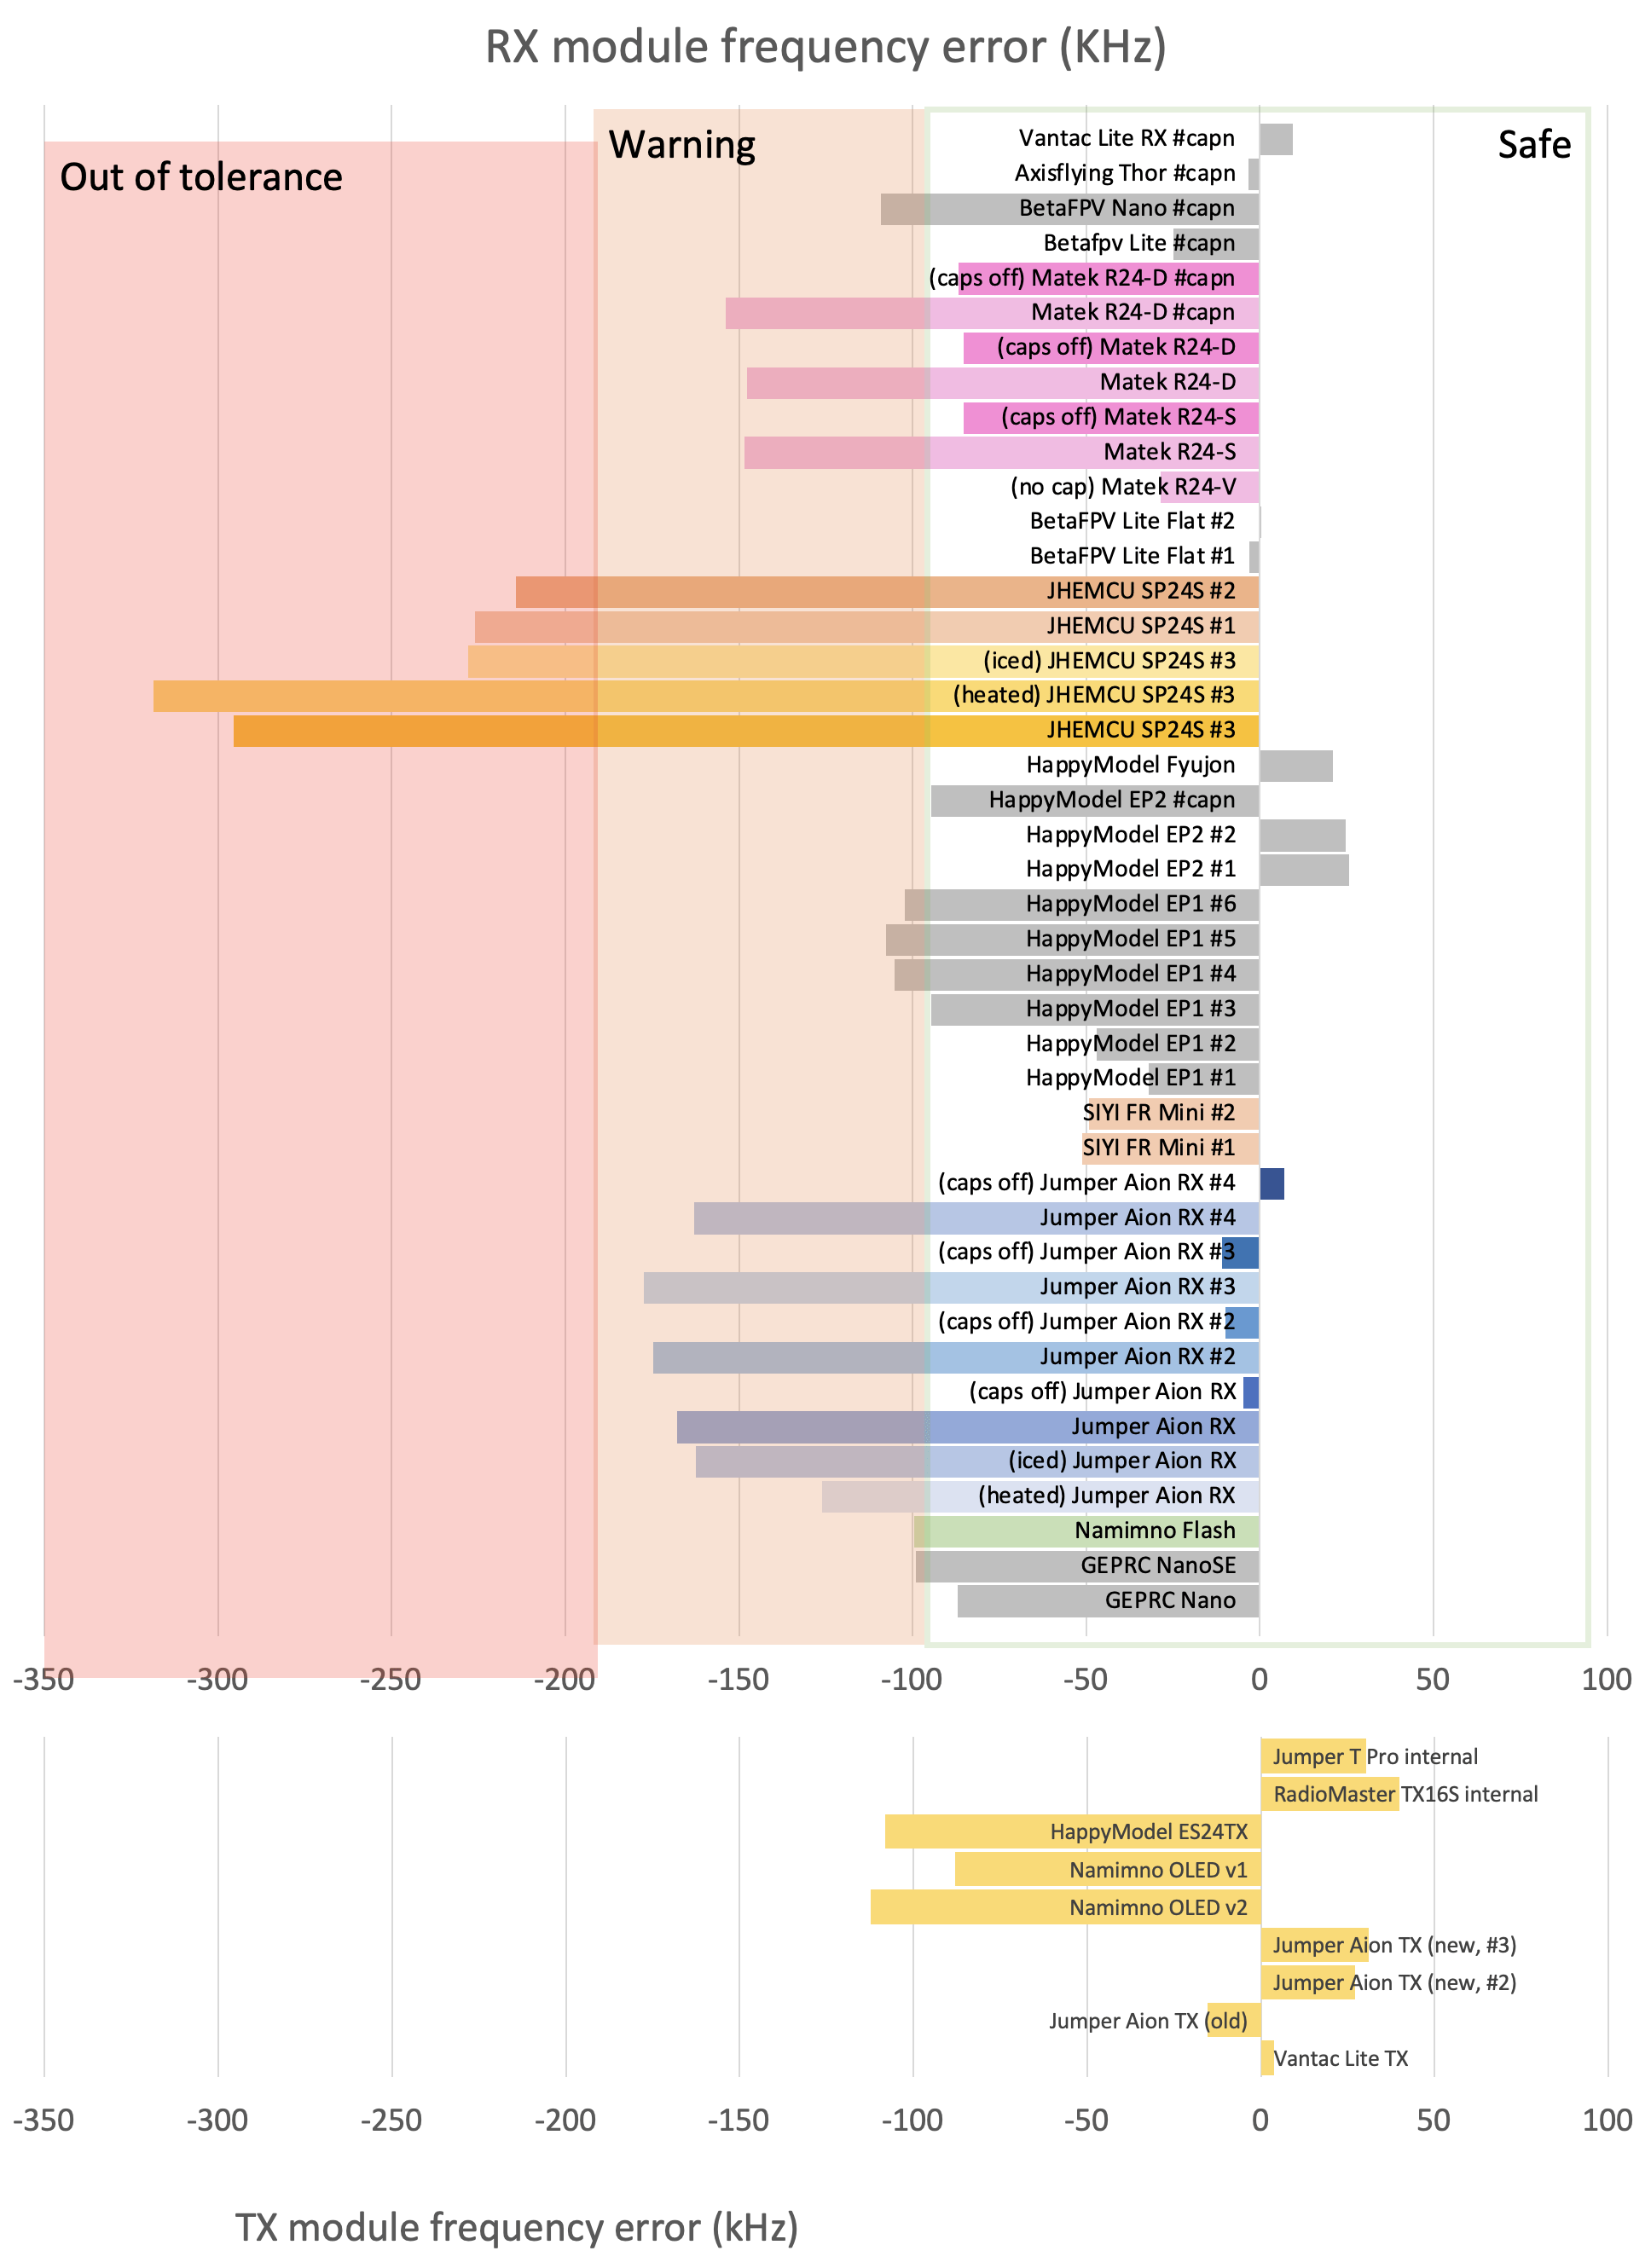 A bar chart of frequency errors from various TX and RX modules